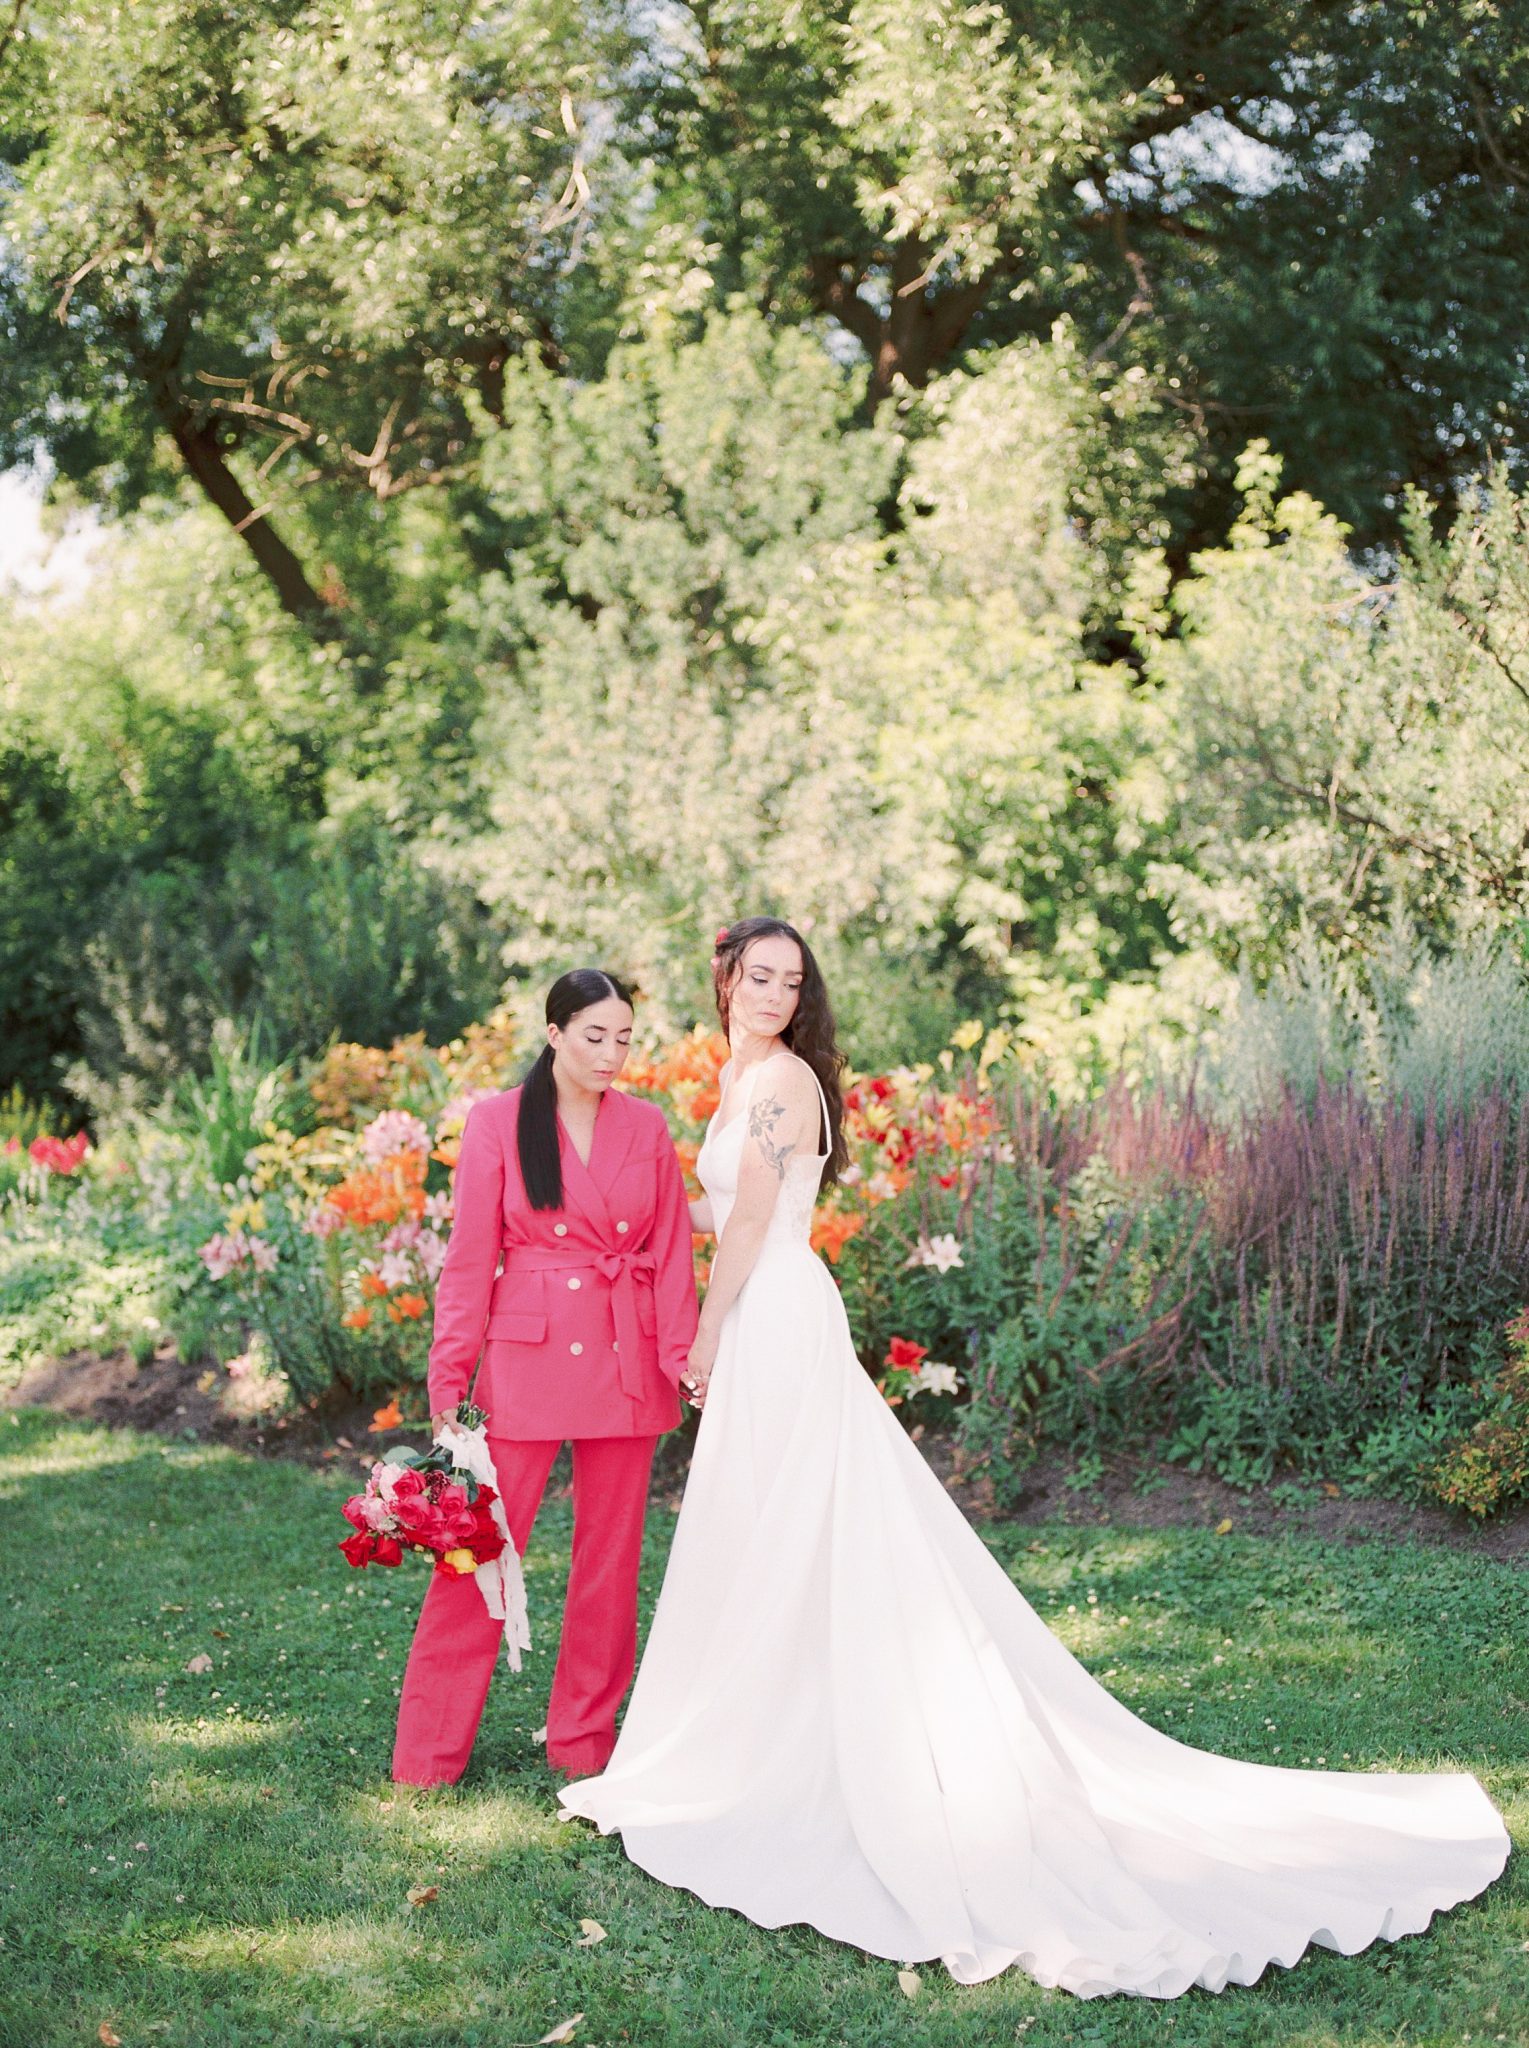 Hot Pink Perfection for this Picnic in the Park Valentine's Day Inspiration Featured by Brontë Bride, picnic inspiration, hot pink suit